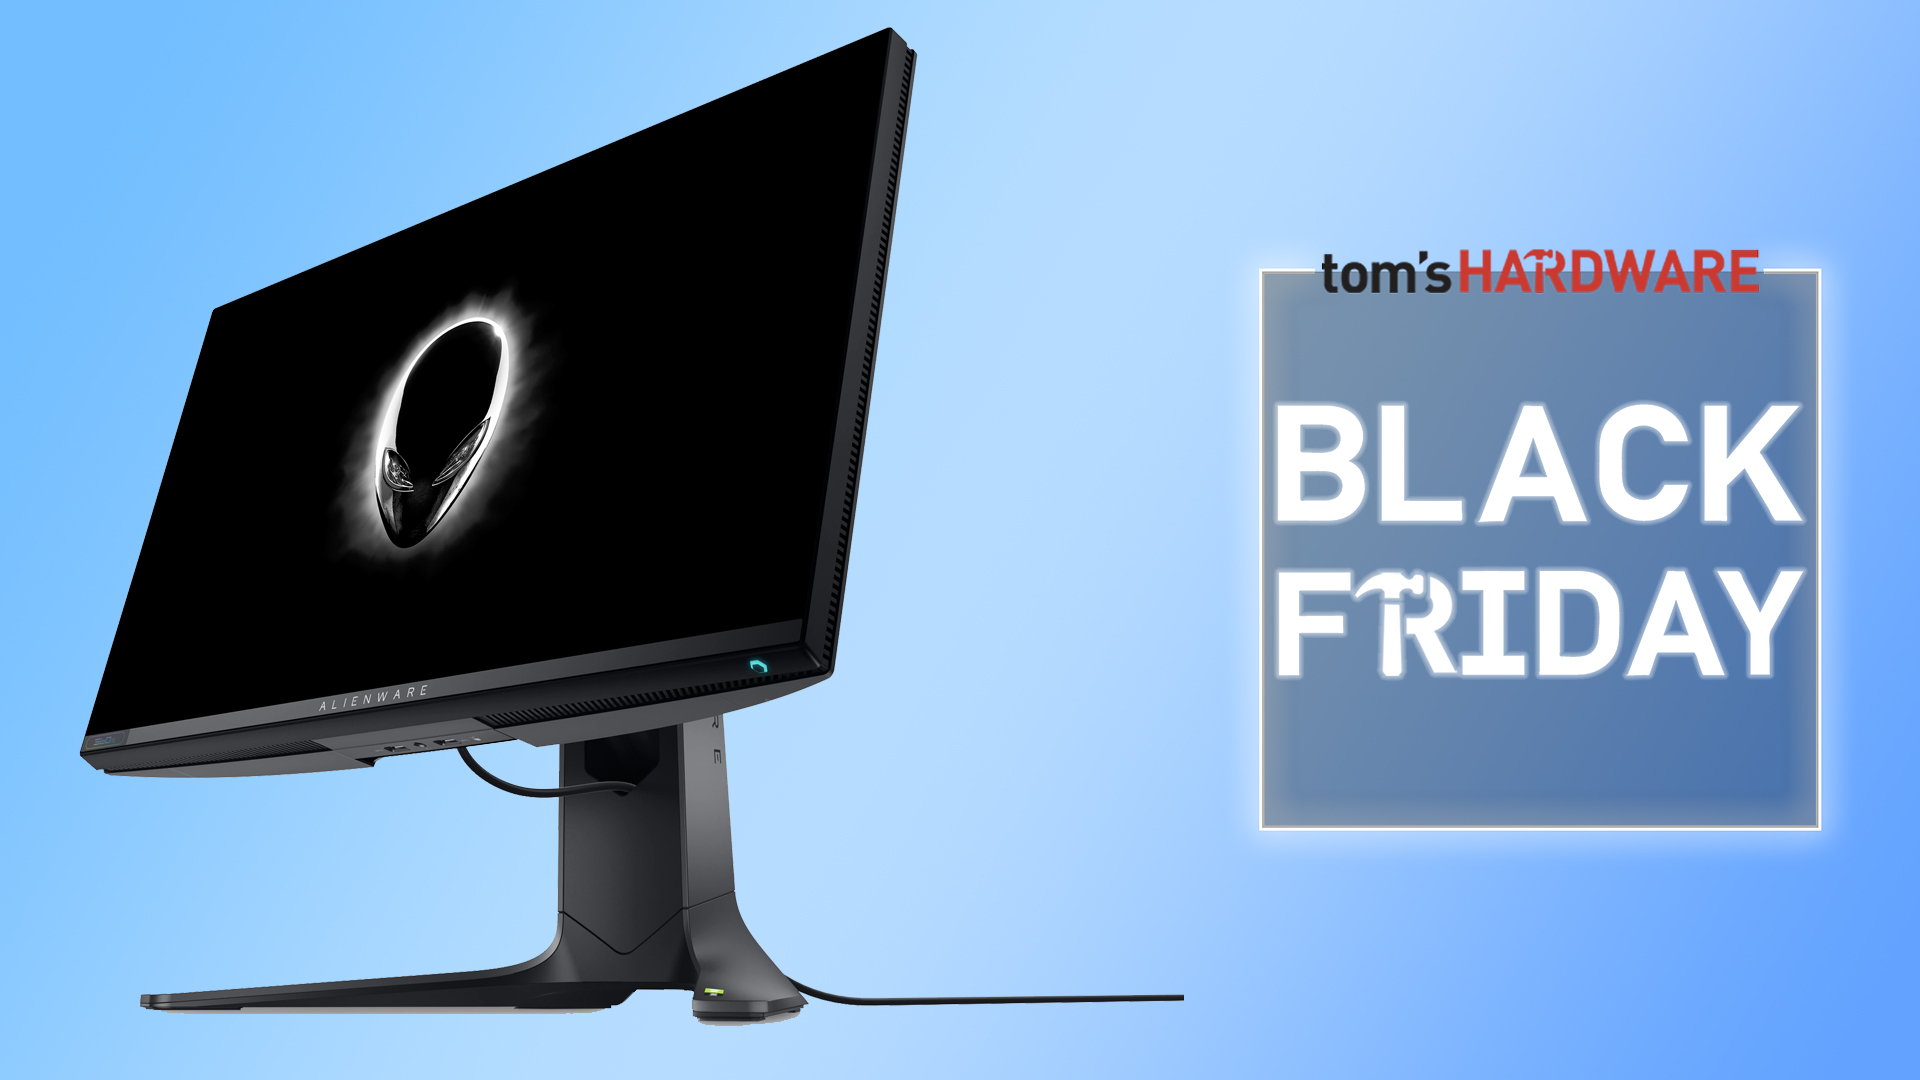 SAVE BIG with this Alienware 360hz gaming monitor deal at